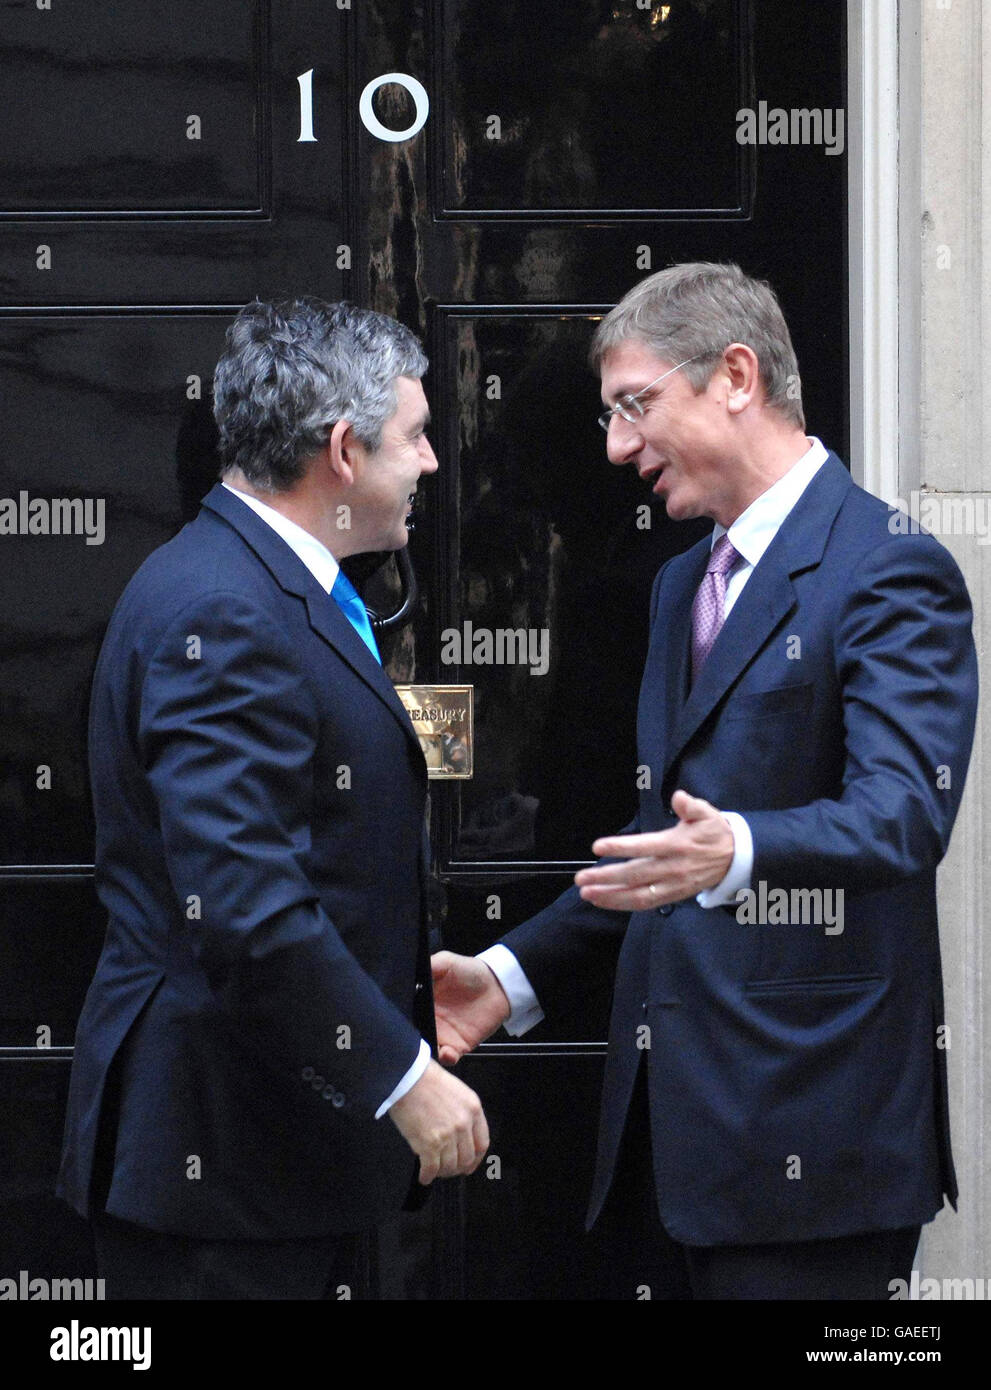 Britain's Prime Minister Gordon Brown greets his Hungarian counterpart Ferenc Gyurcsany on the steps of 10 Downing Street, London. Stock Photo